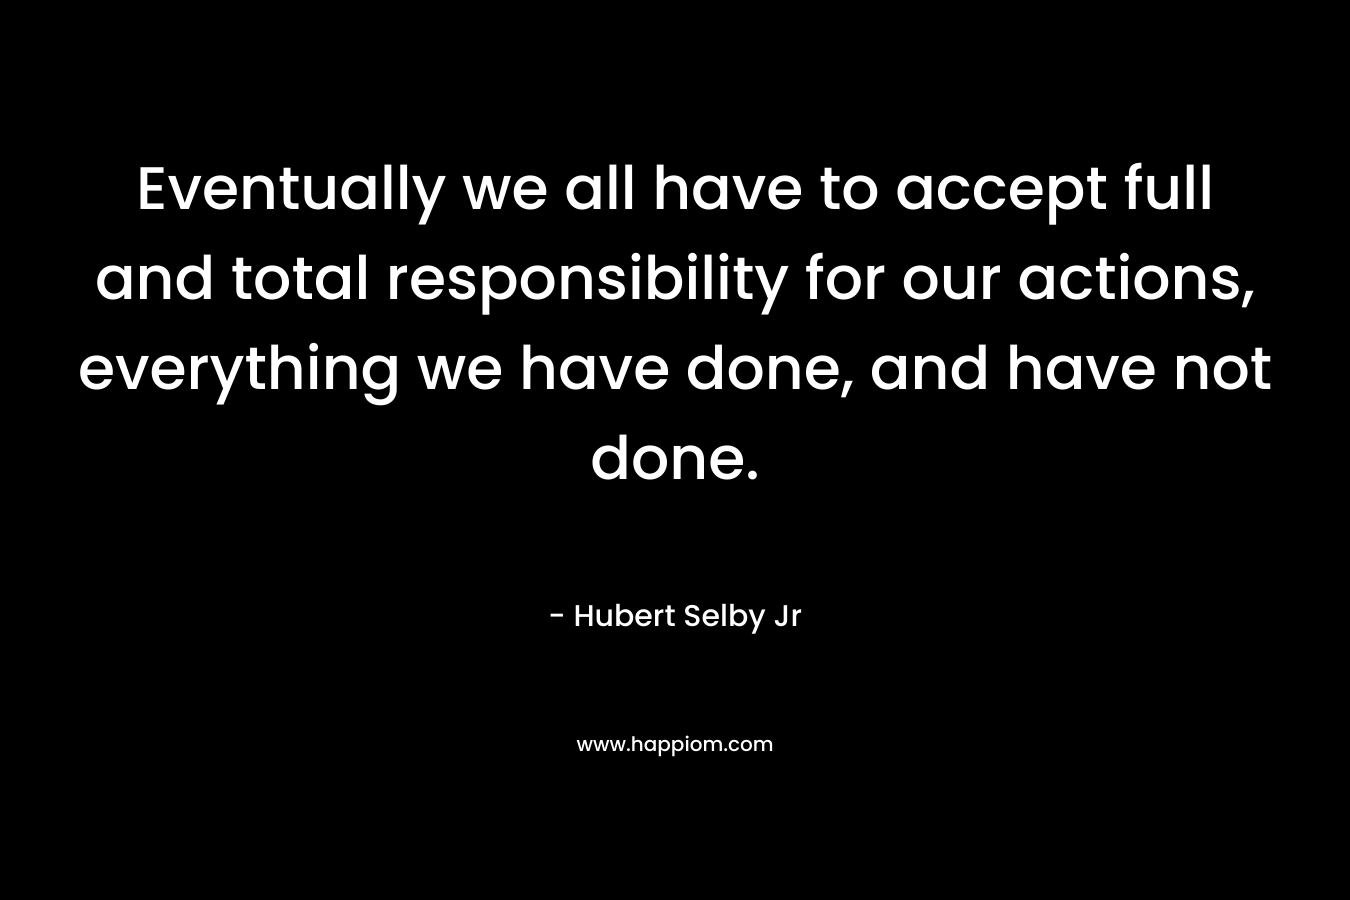 Eventually we all have to accept full and total responsibility for our actions, everything we have done, and have not done.  – Hubert Selby Jr